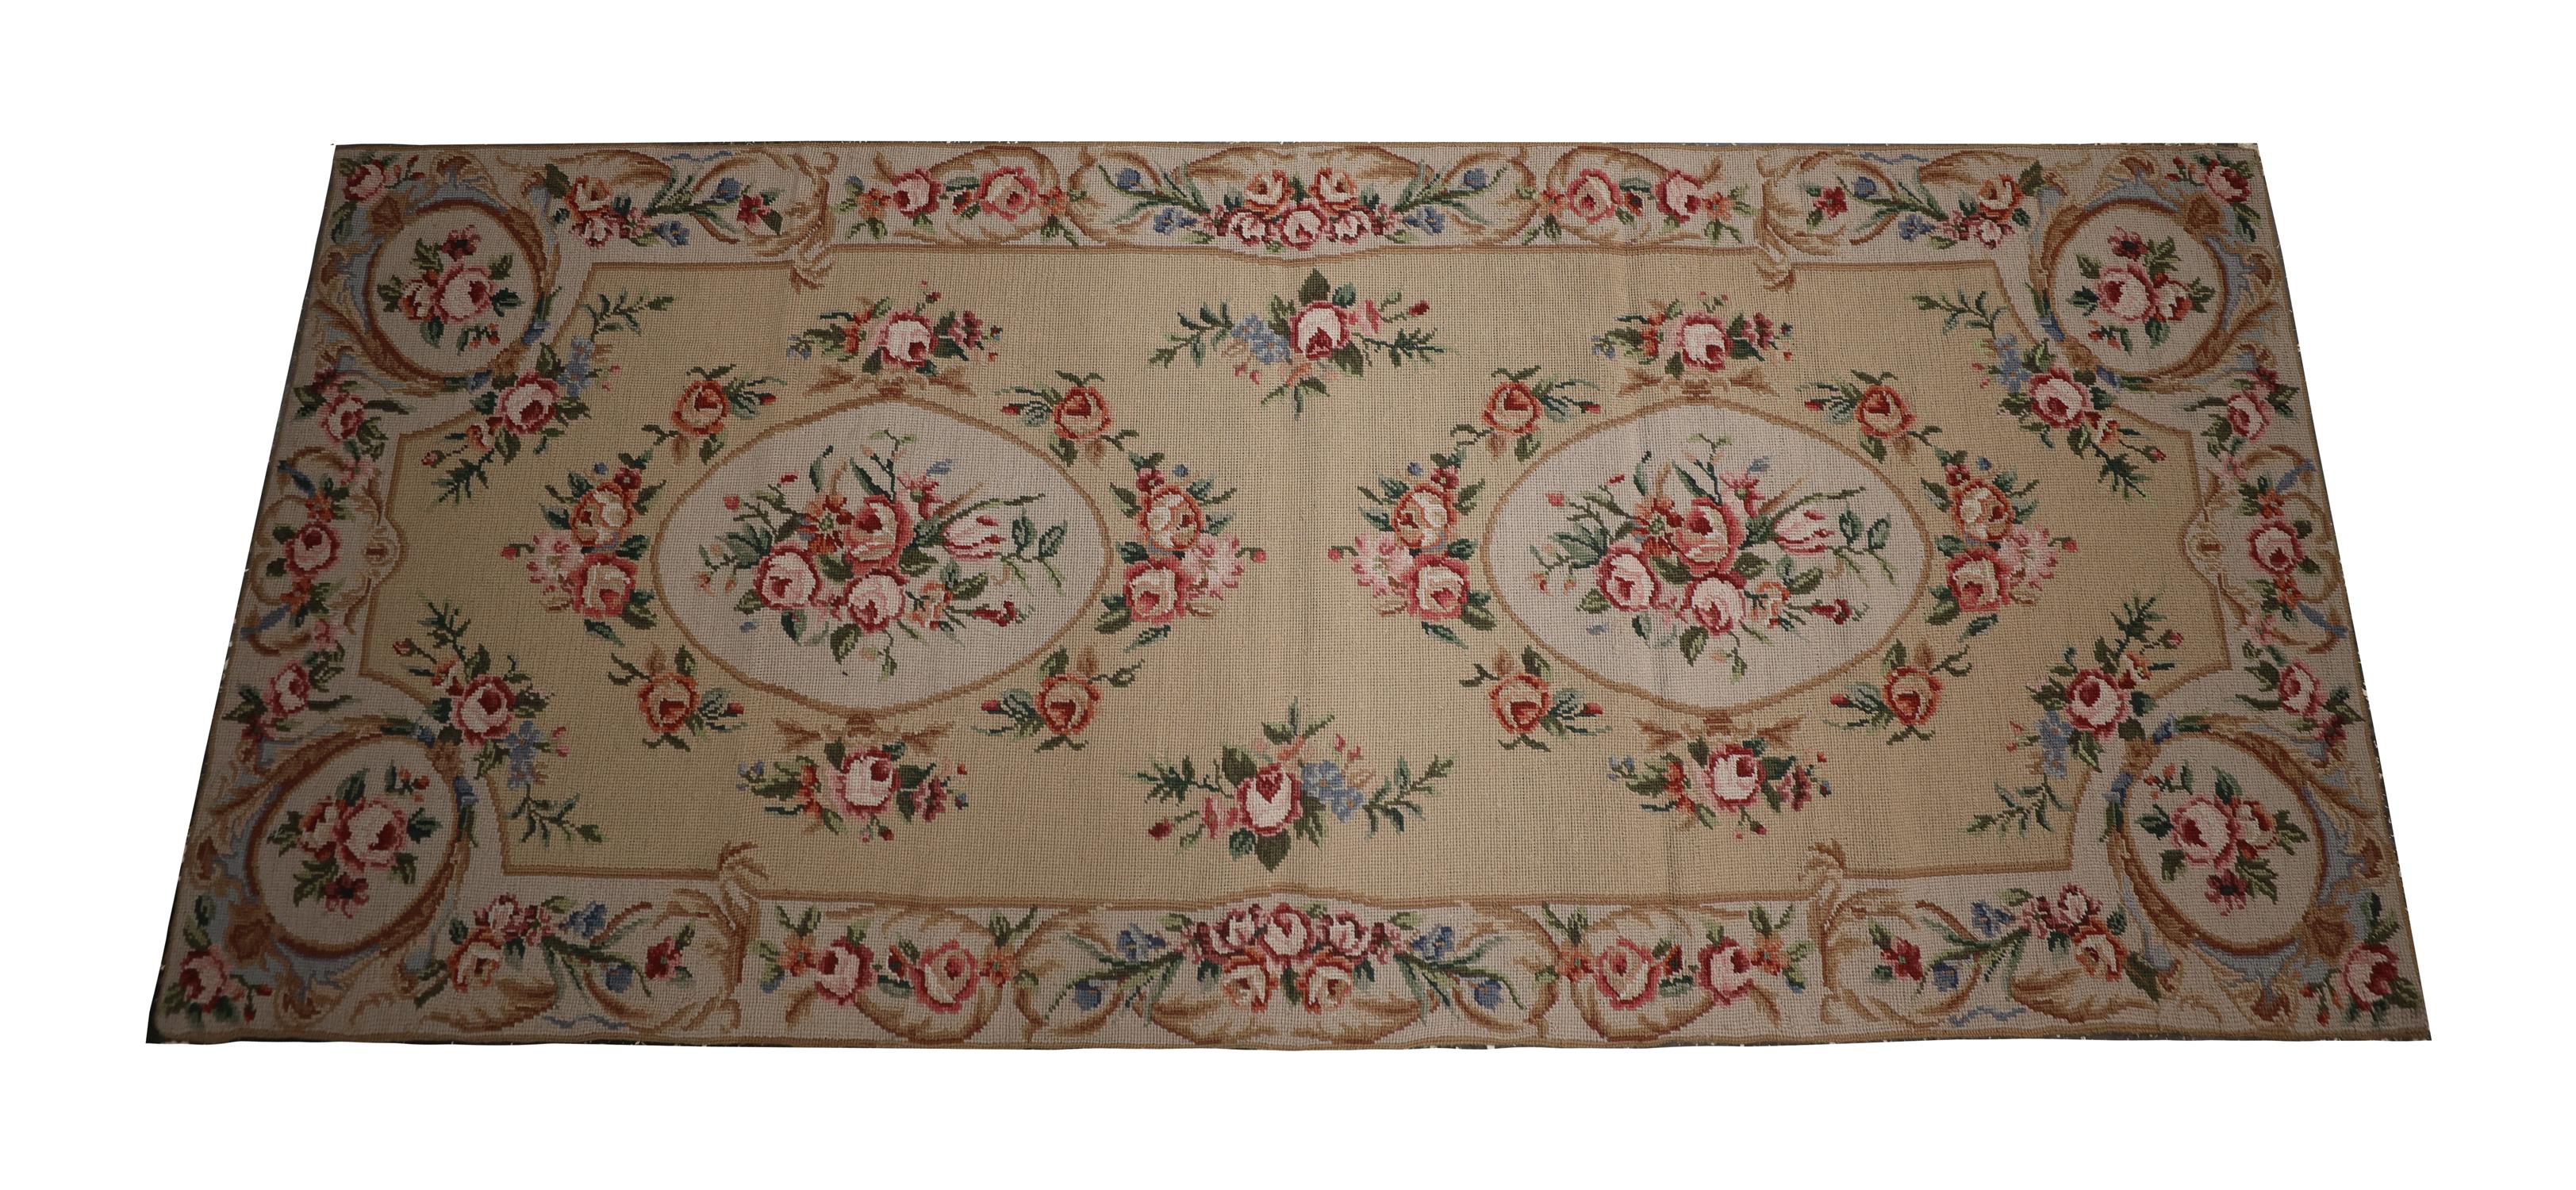 This elegant needlepoint rug was woven by hand in the early 21st century, using traditional techniques and materials. The beautiful Aubusson design features two oval, floral medallions woven in accents of pink, ivory and green on a cream repeat